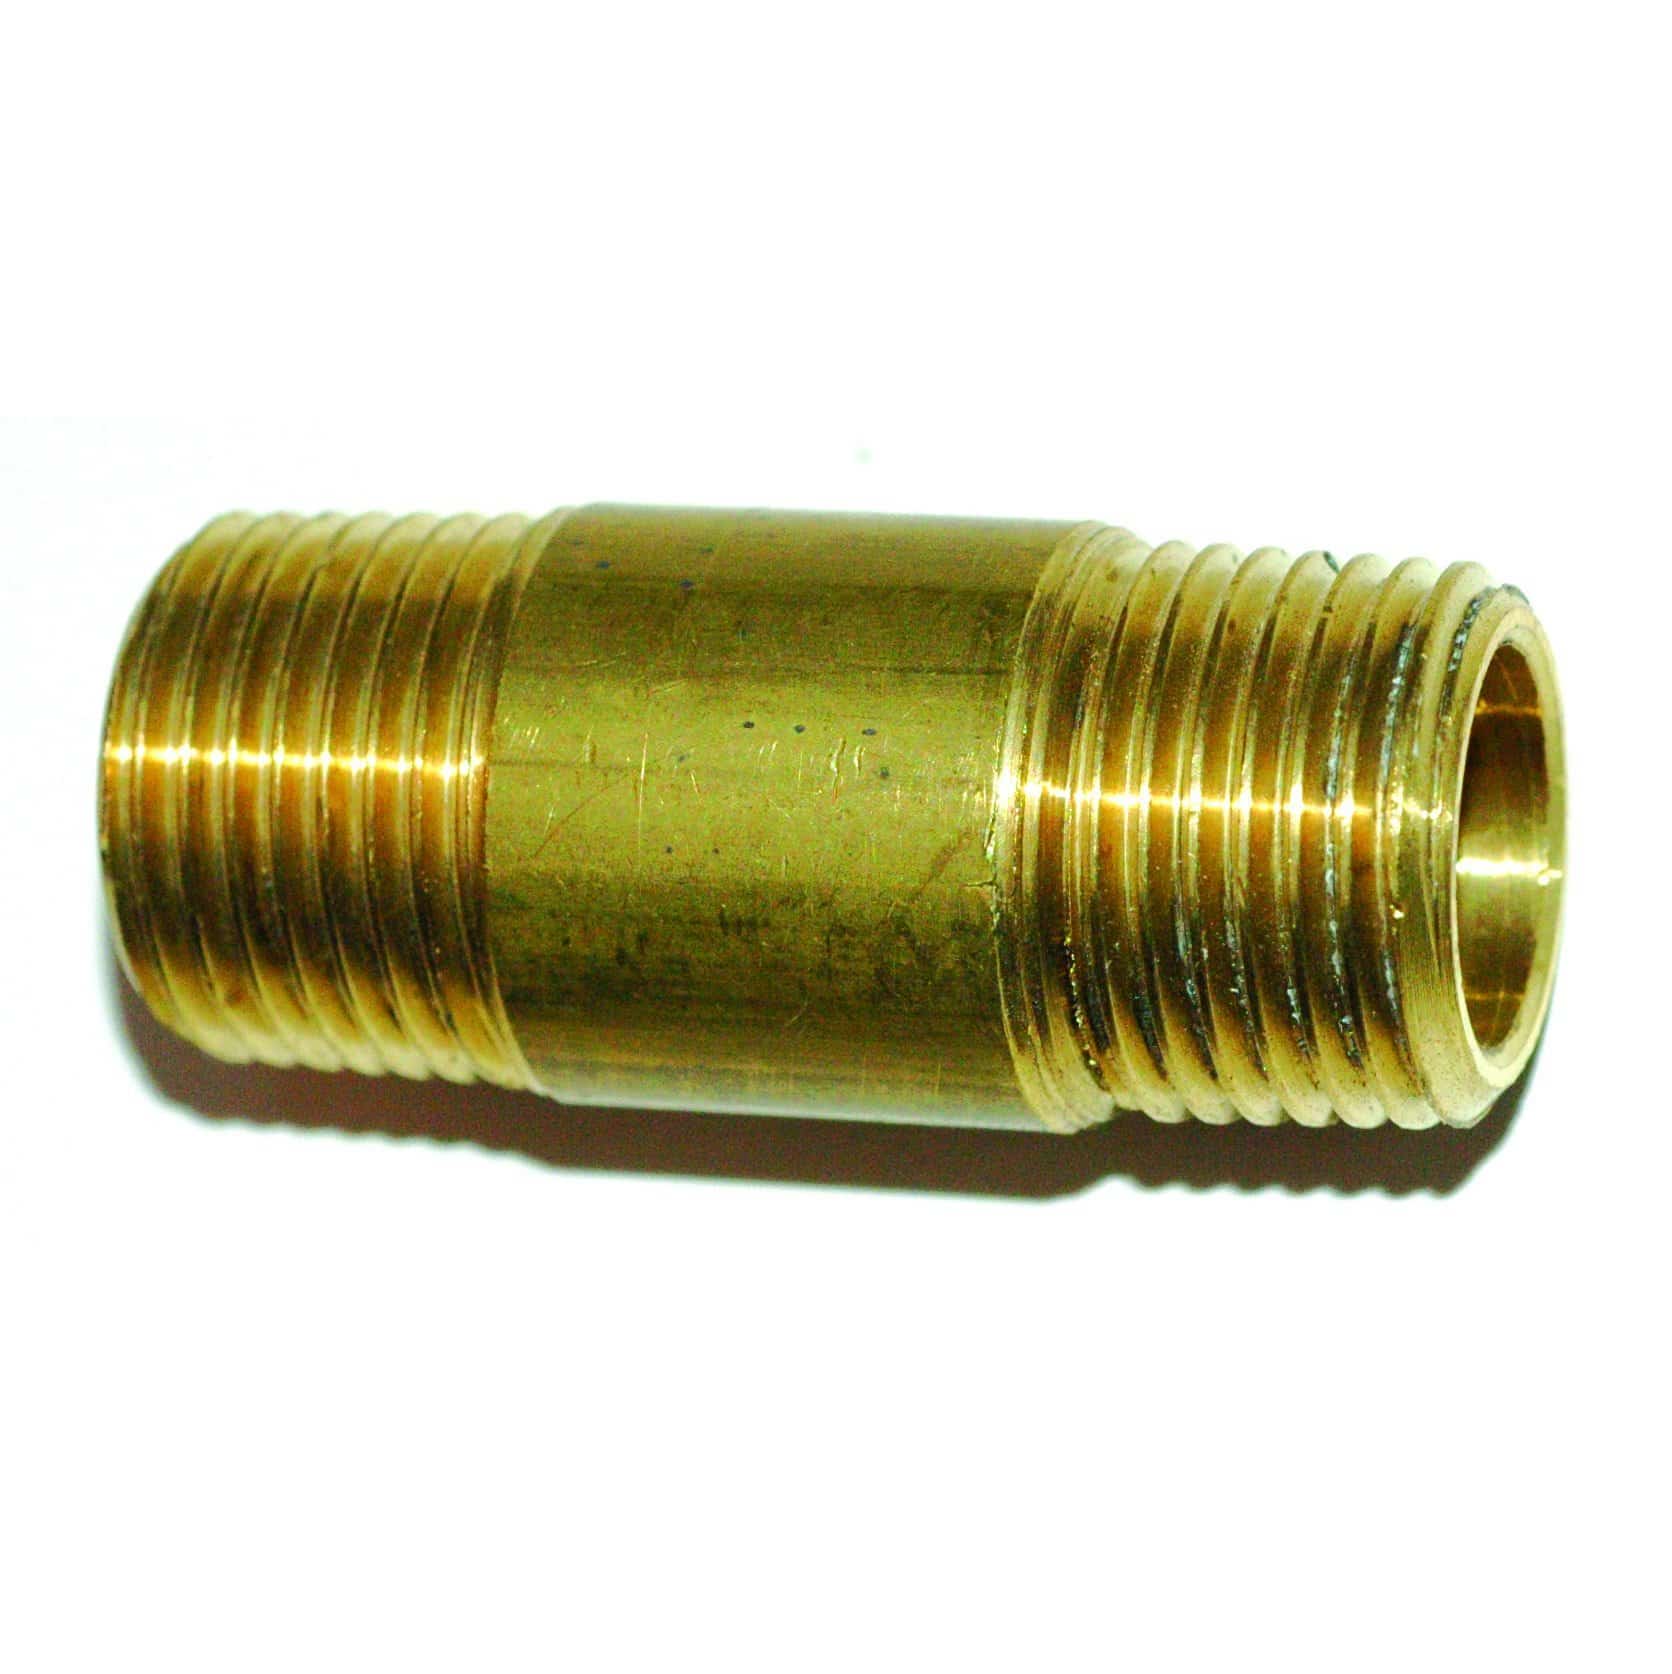 Long brass barrel nipple fitting with BSPT threads